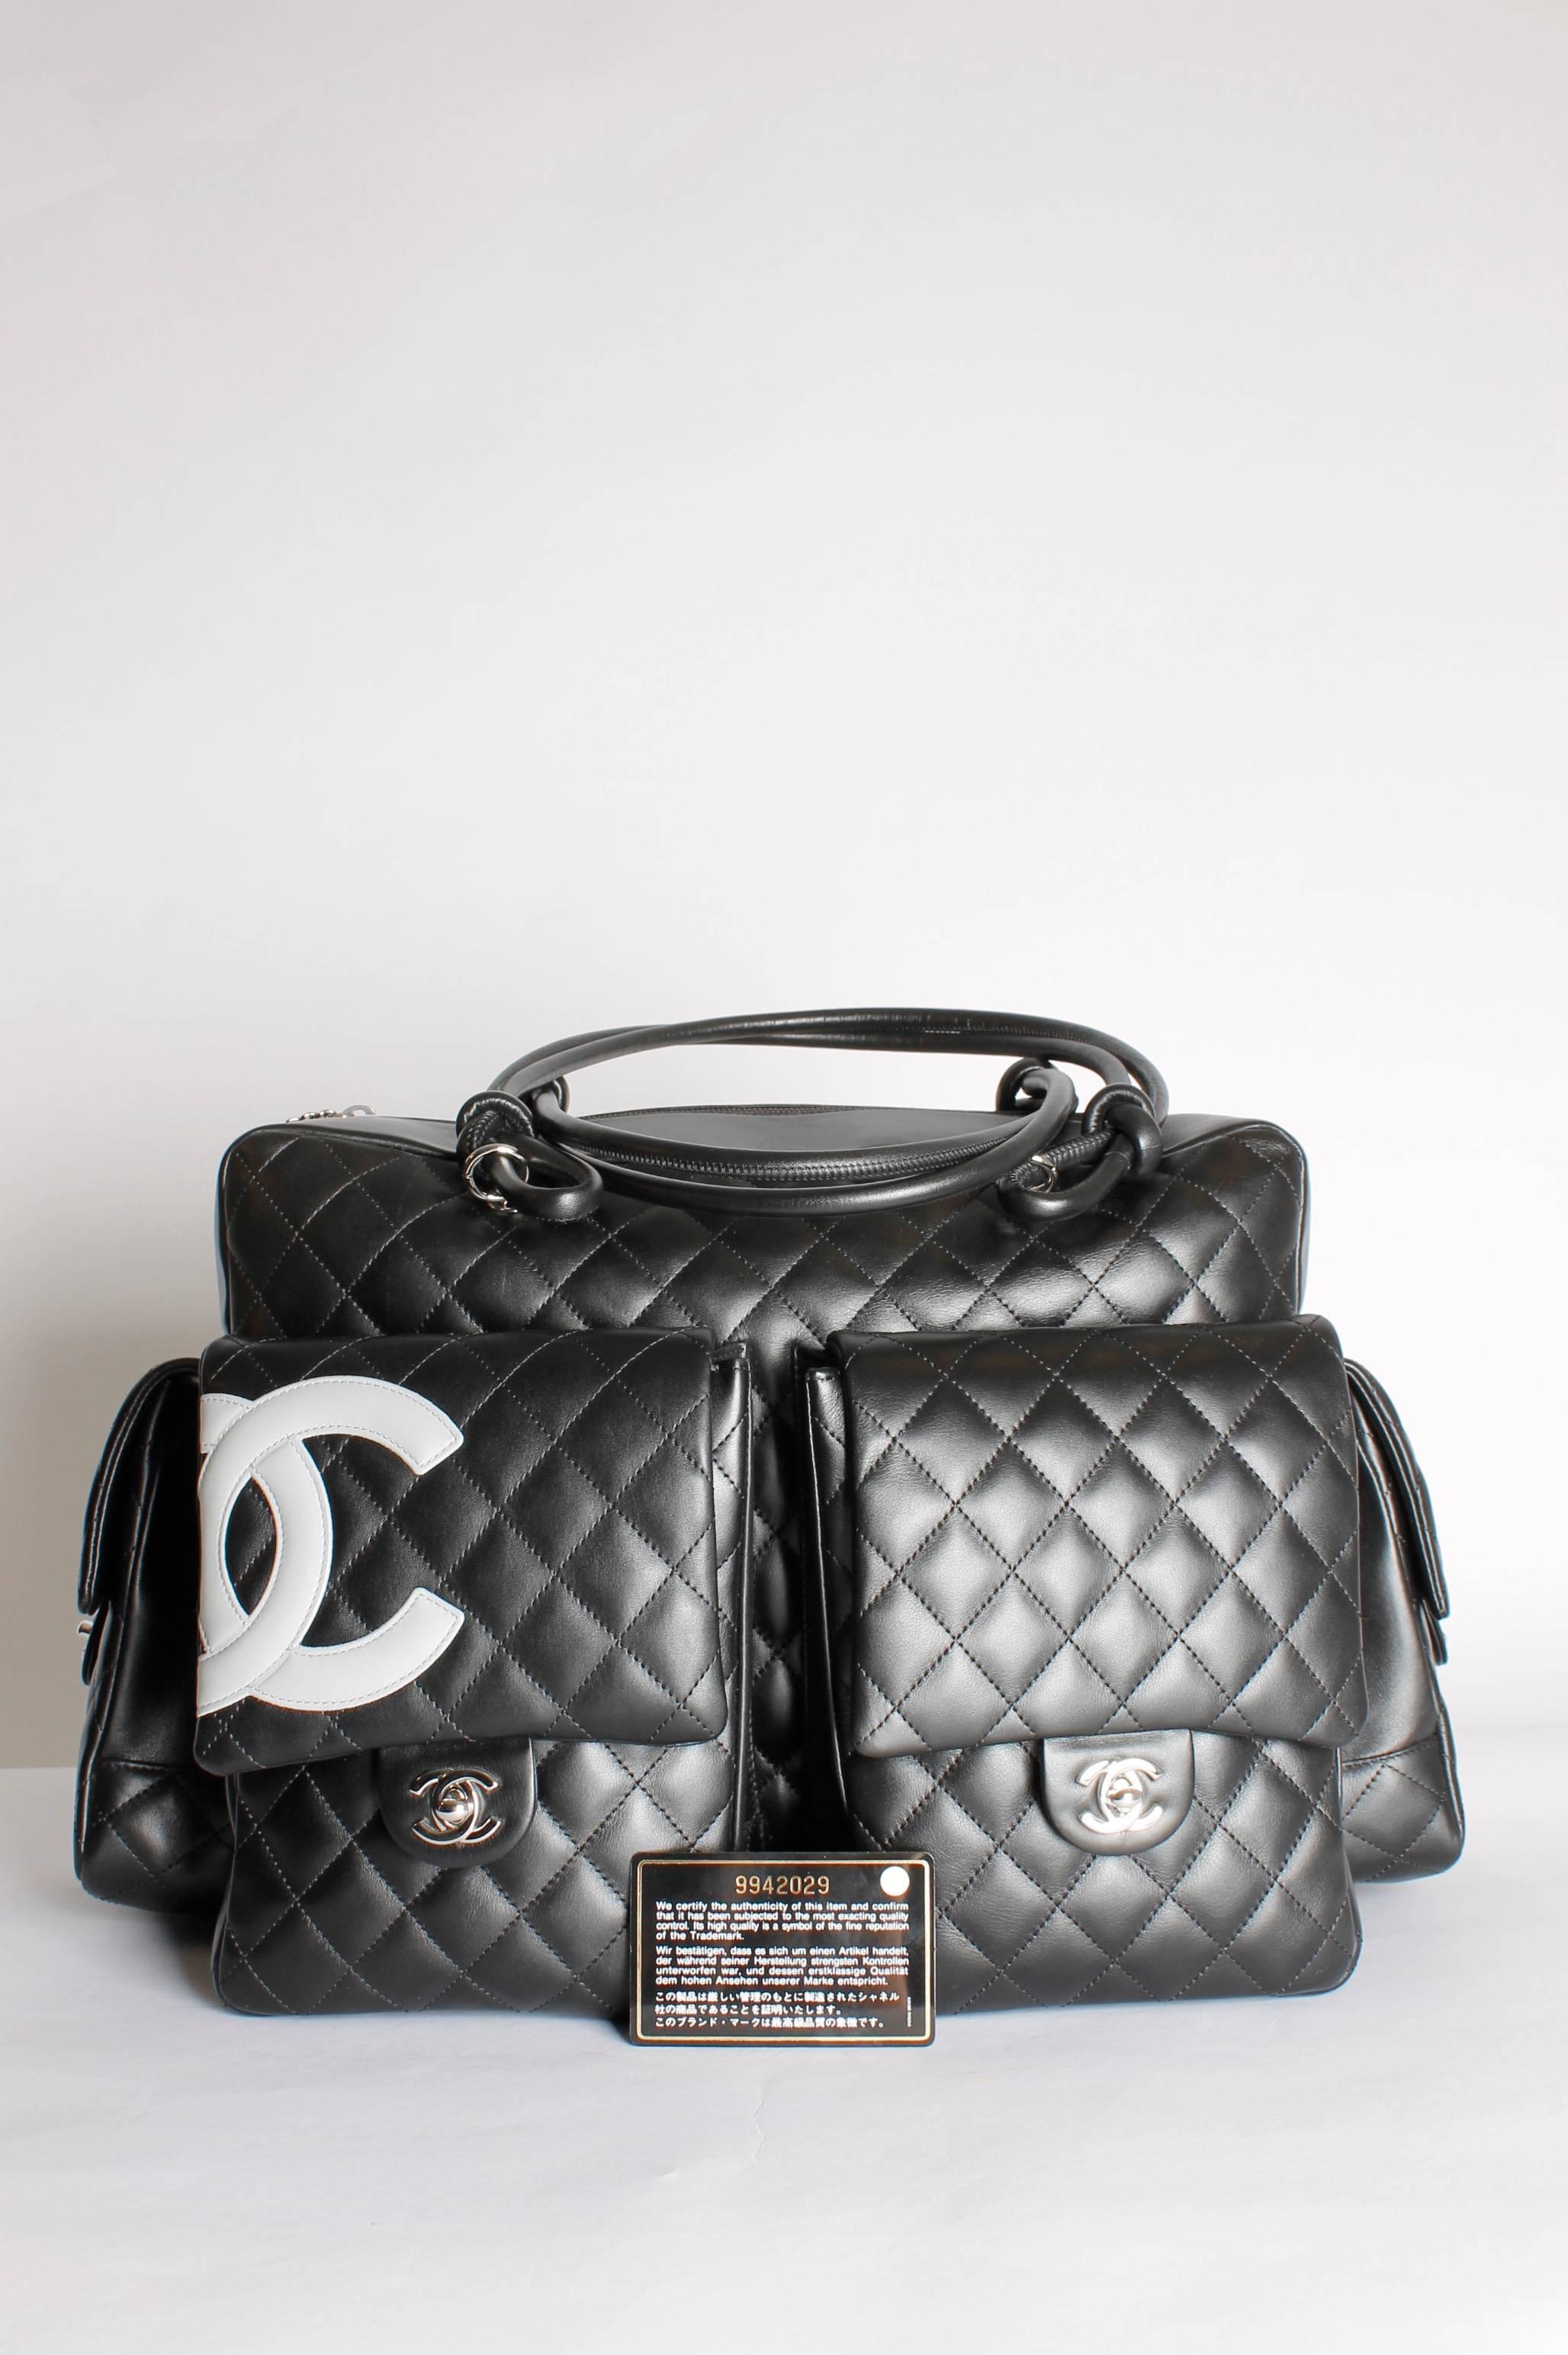 This one is big, really big! It's the Chanel Ligne Cambon Multipocket Reporter XL Bag and it's used as a weekend-bag.

Four large pockets at exterior, they all have a flap and a silver turn-lock closure. On one of the pockets a grey interlocking